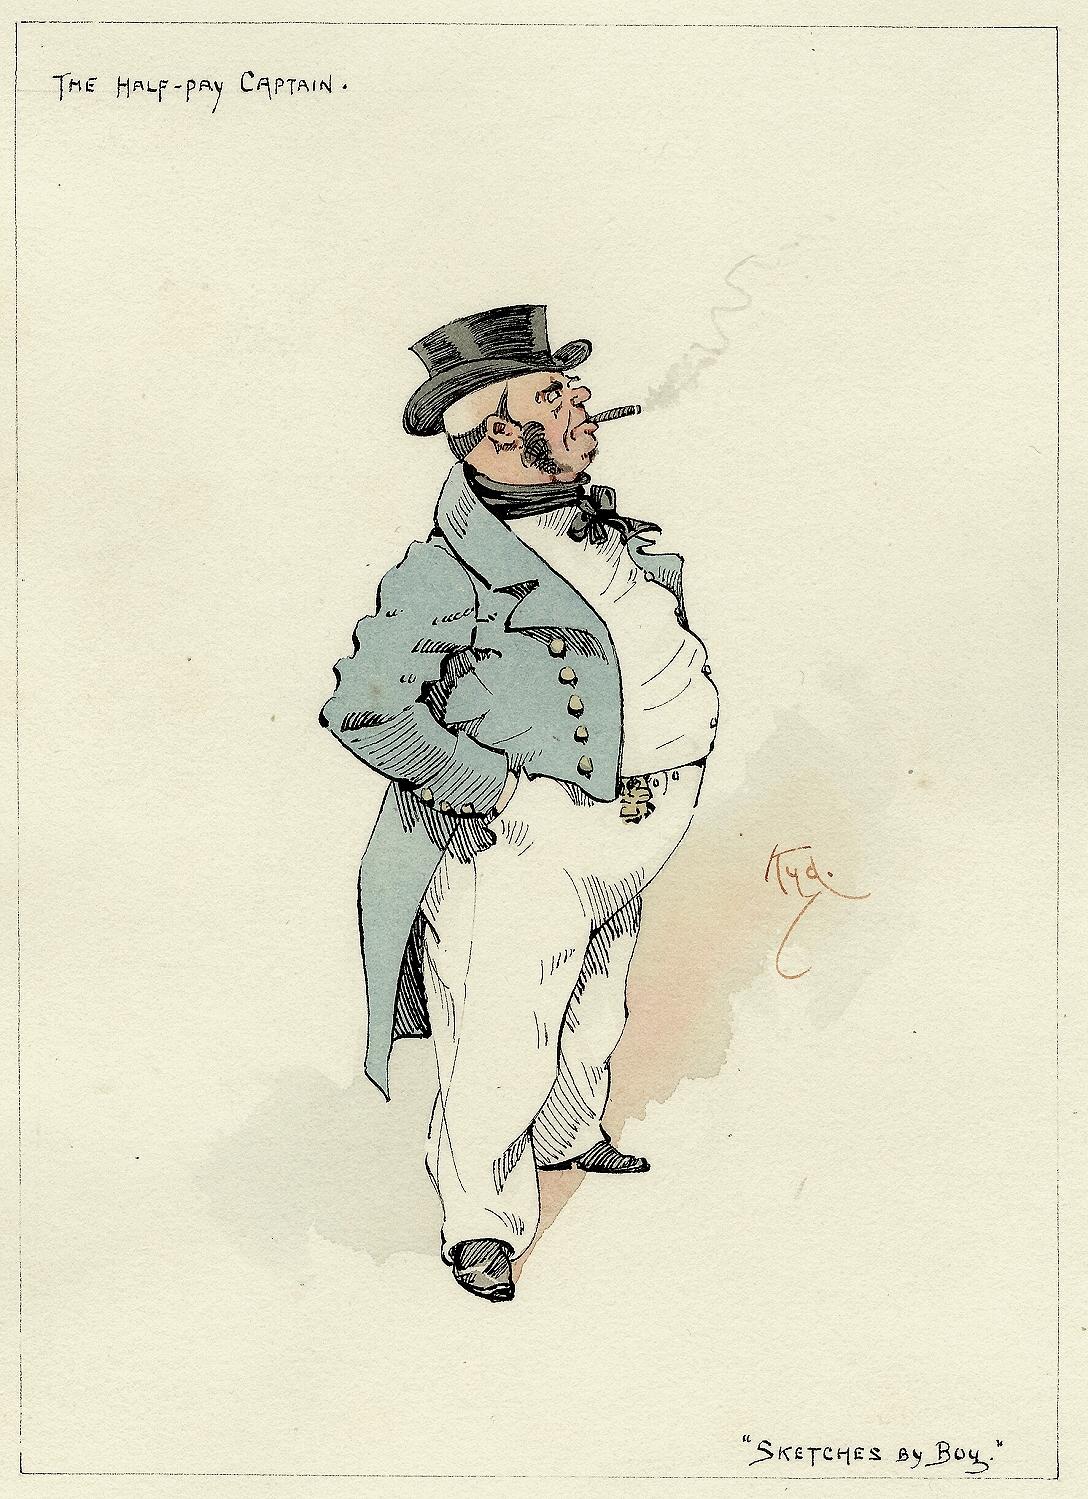 British (KYD) - DICKENS - The Half-Pay Captain (from Sketches By Boz) - ORIGINAL SKETCH For Sale